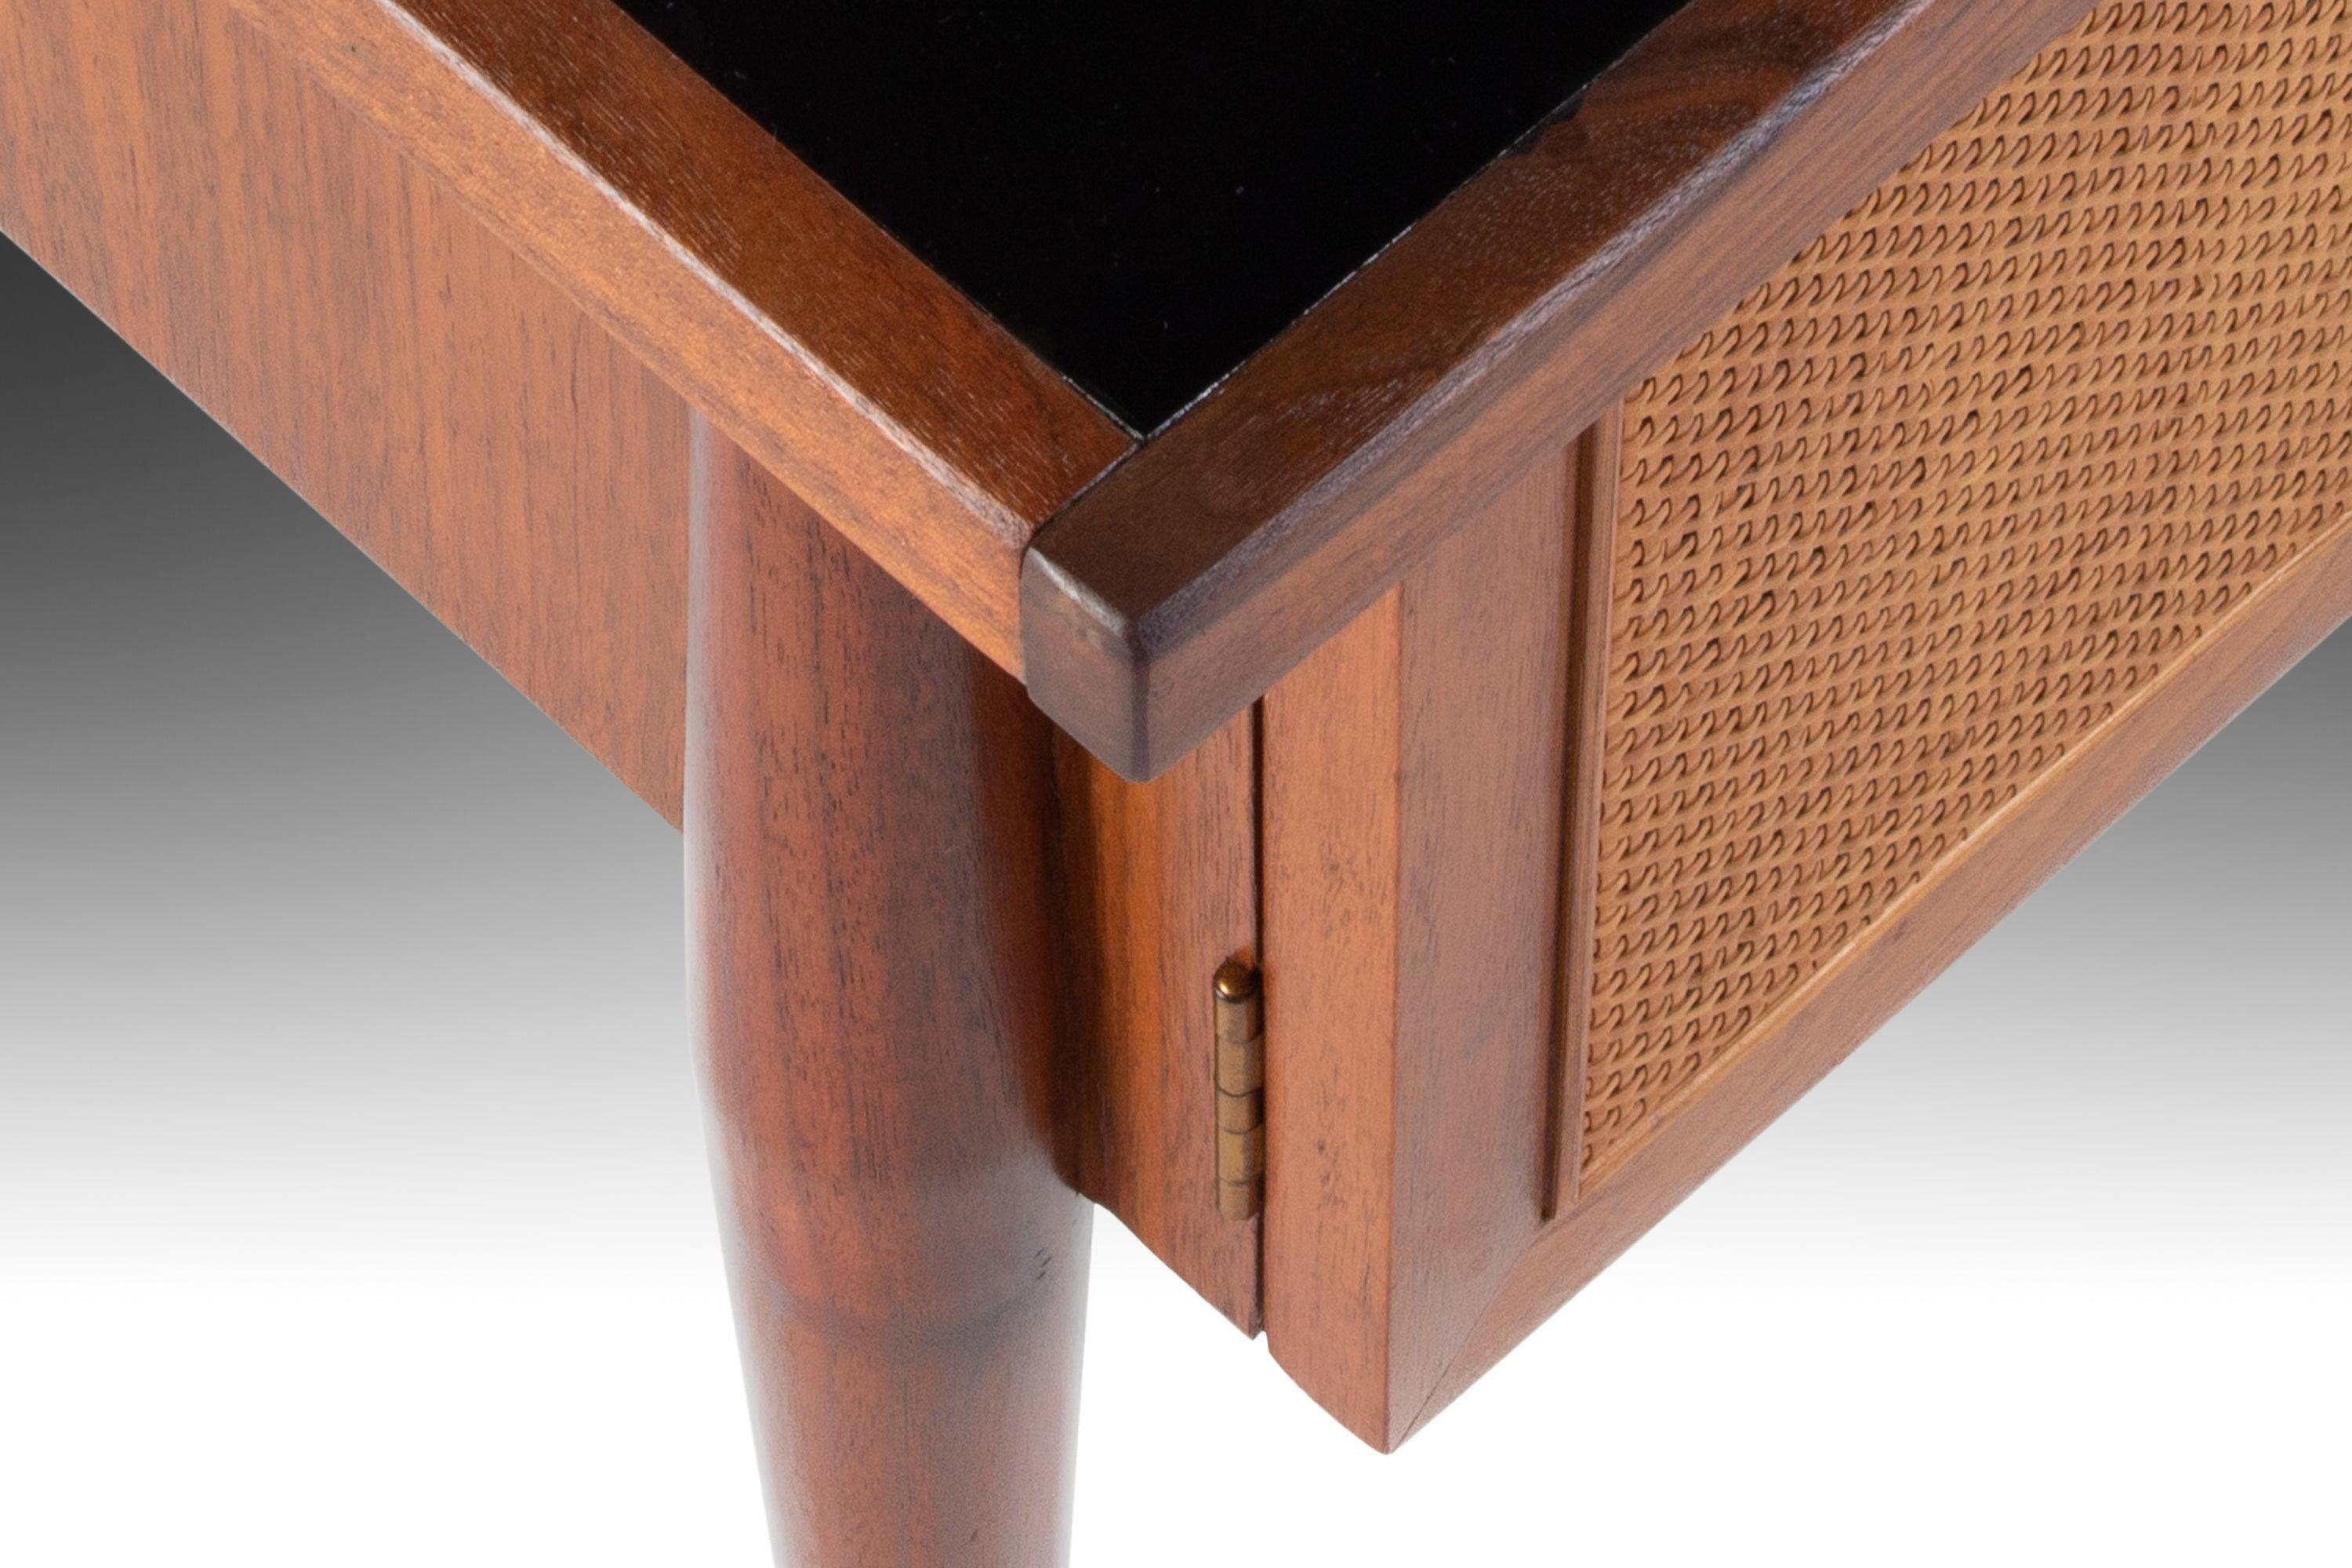 End Table Table in Cane and Walnut by Jack Cartwright for Founders, USA, c 1960s 5